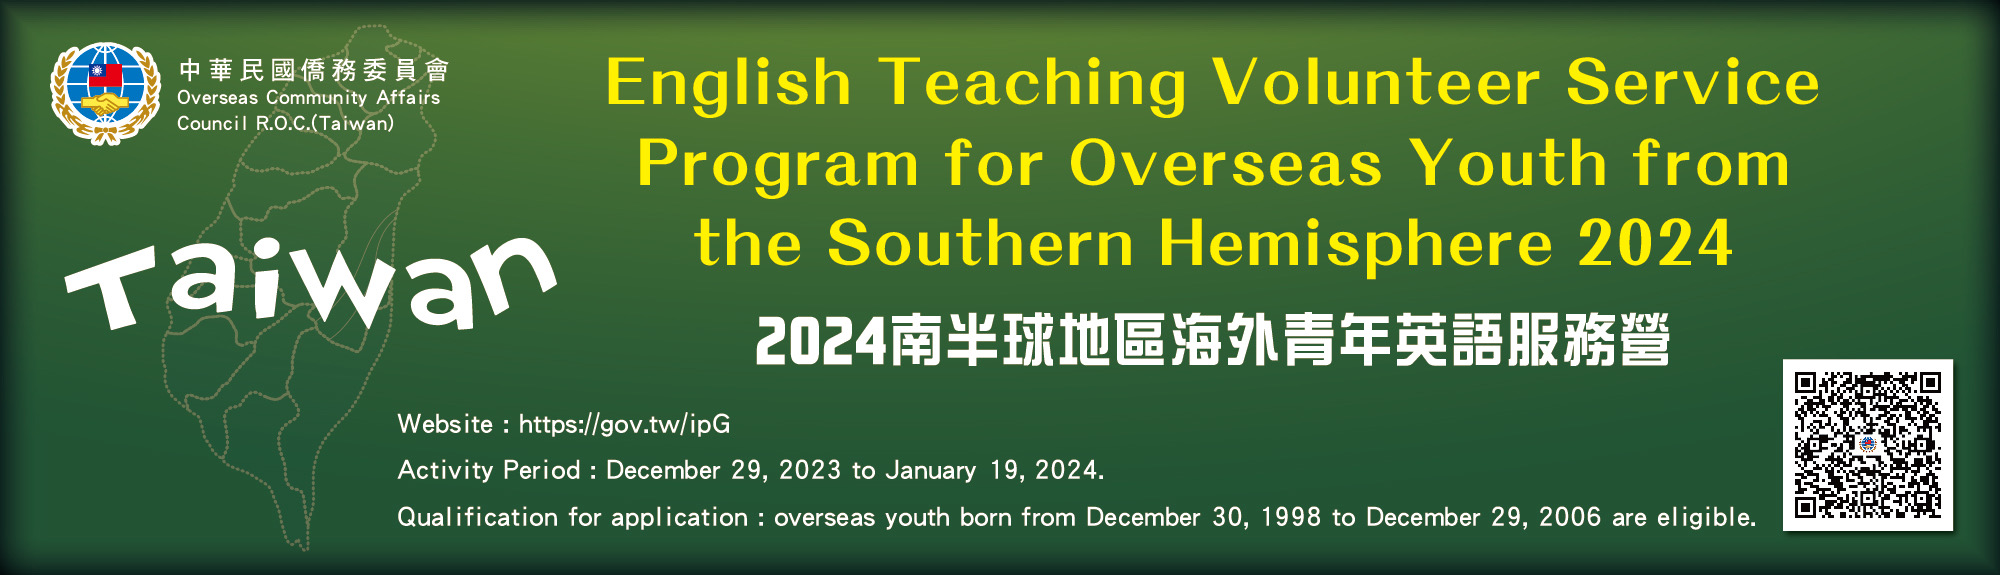 English Teaching Volunteer Service Program for Overseas Youth from the Southern Hemisphere 2024